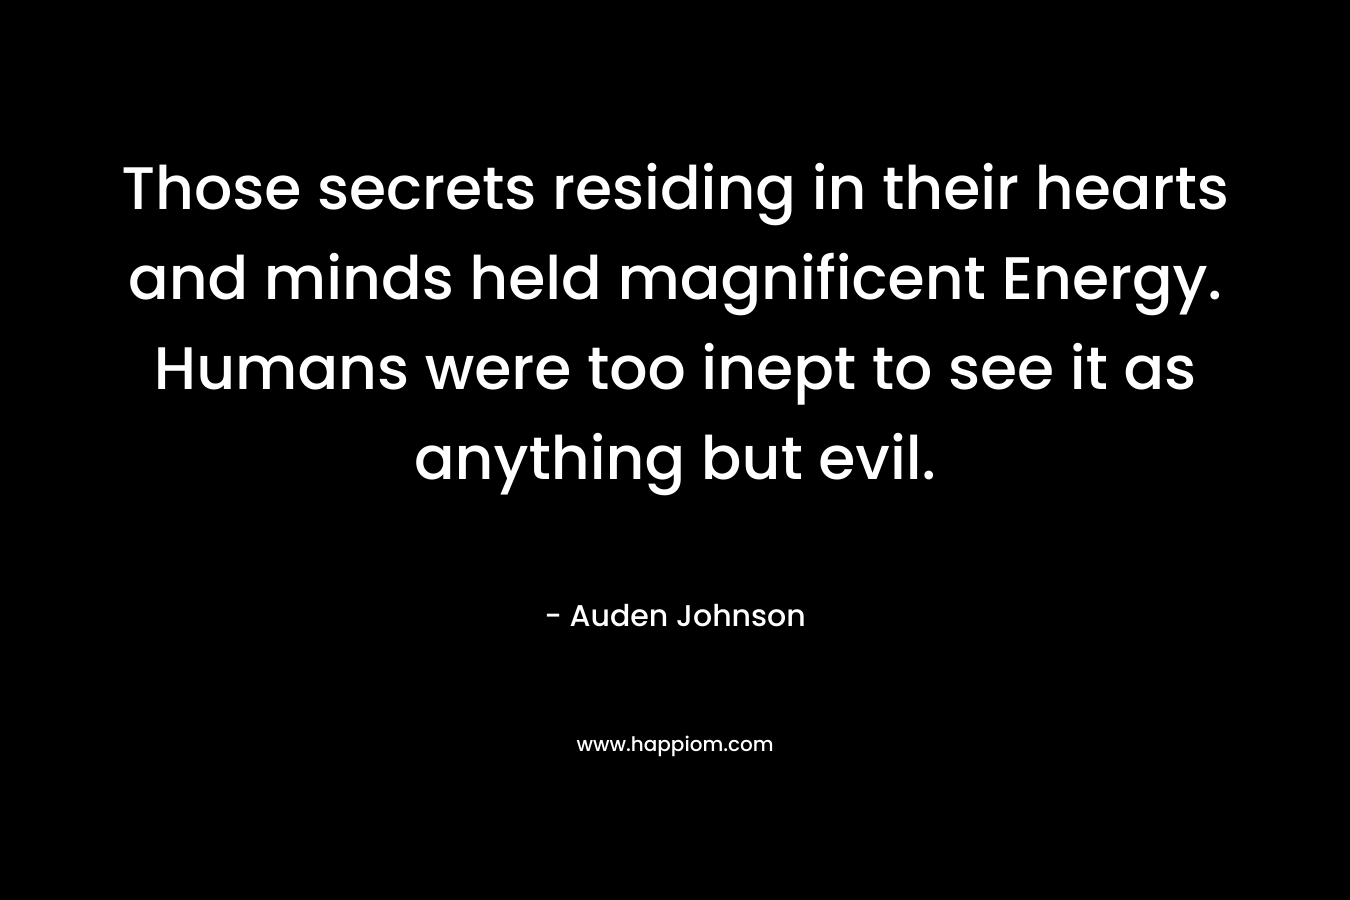 Those secrets residing in their hearts and minds held magnificent Energy. Humans were too inept to see it as anything but evil.